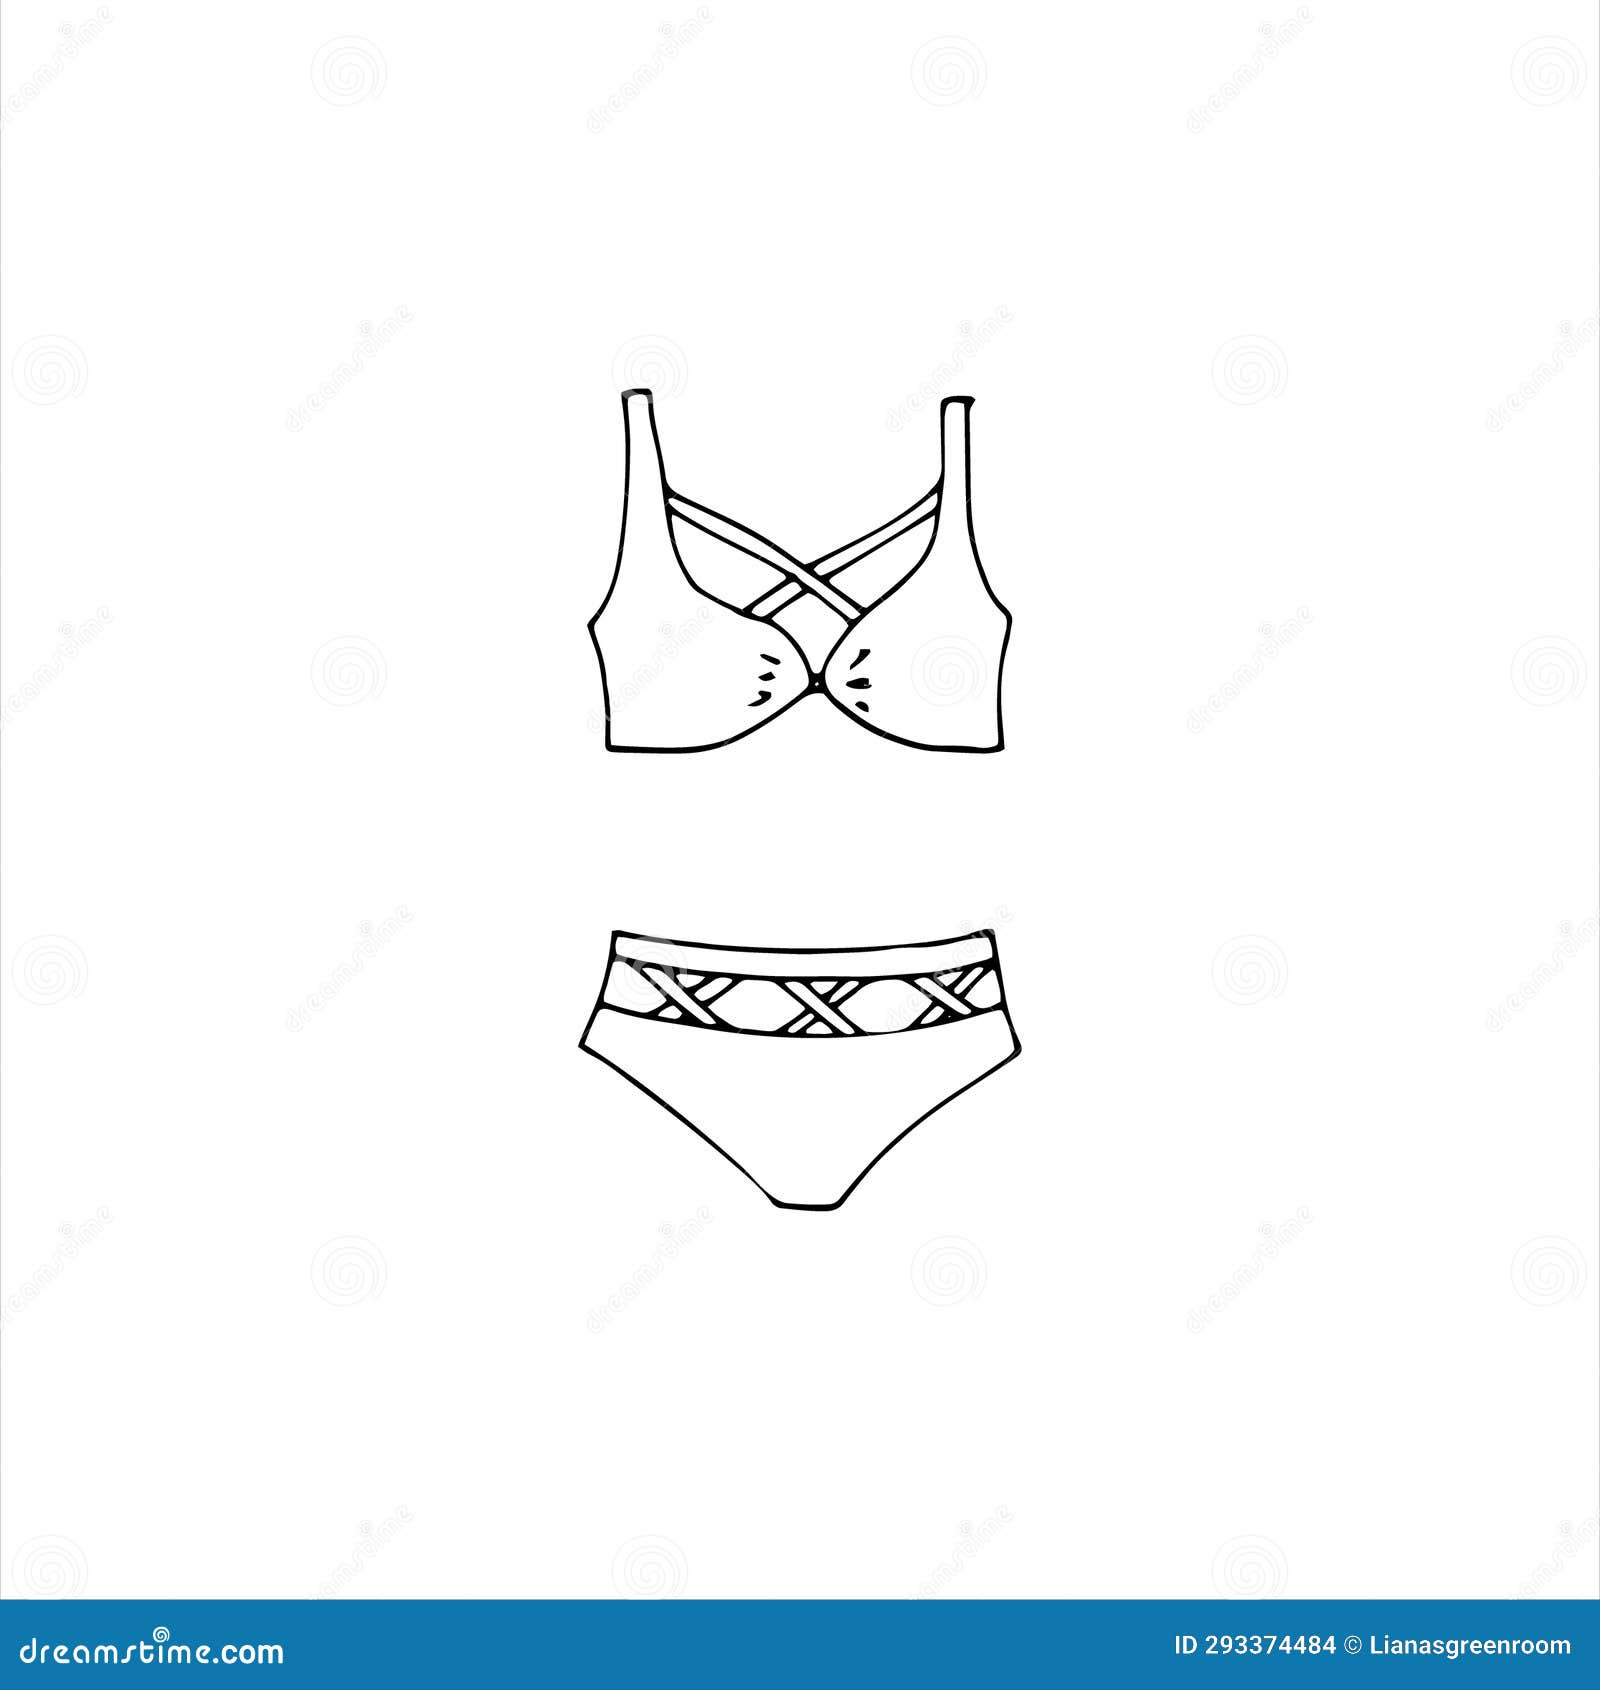 Hand-drawn women's lingerie. Doodle style bra and panties